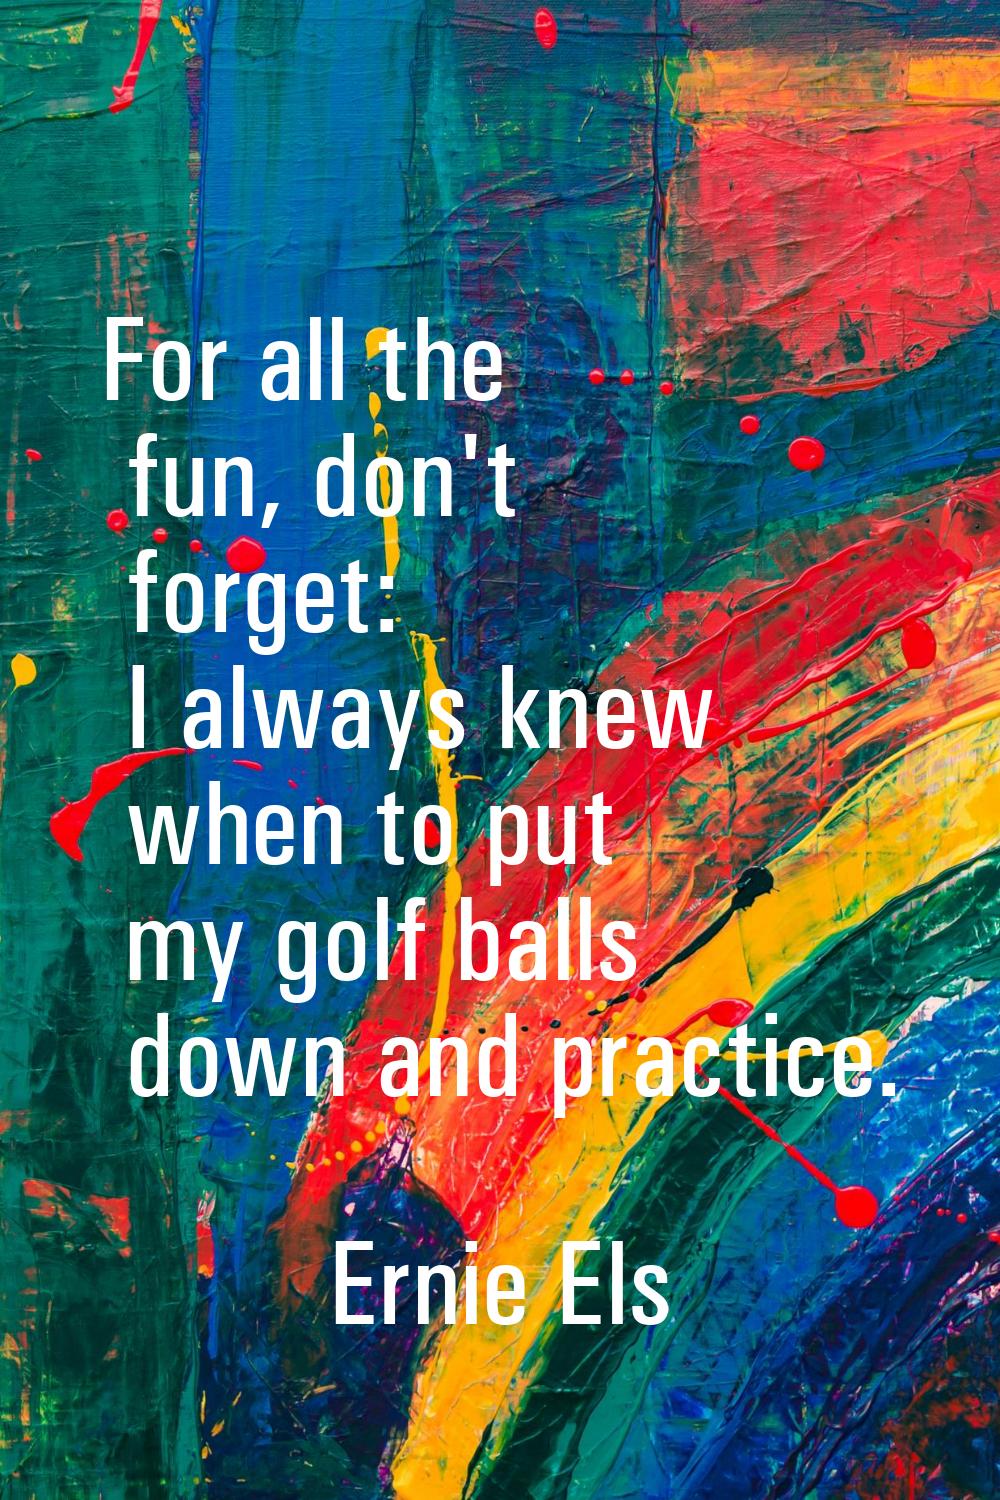 For all the fun, don't forget: I always knew when to put my golf balls down and practice.